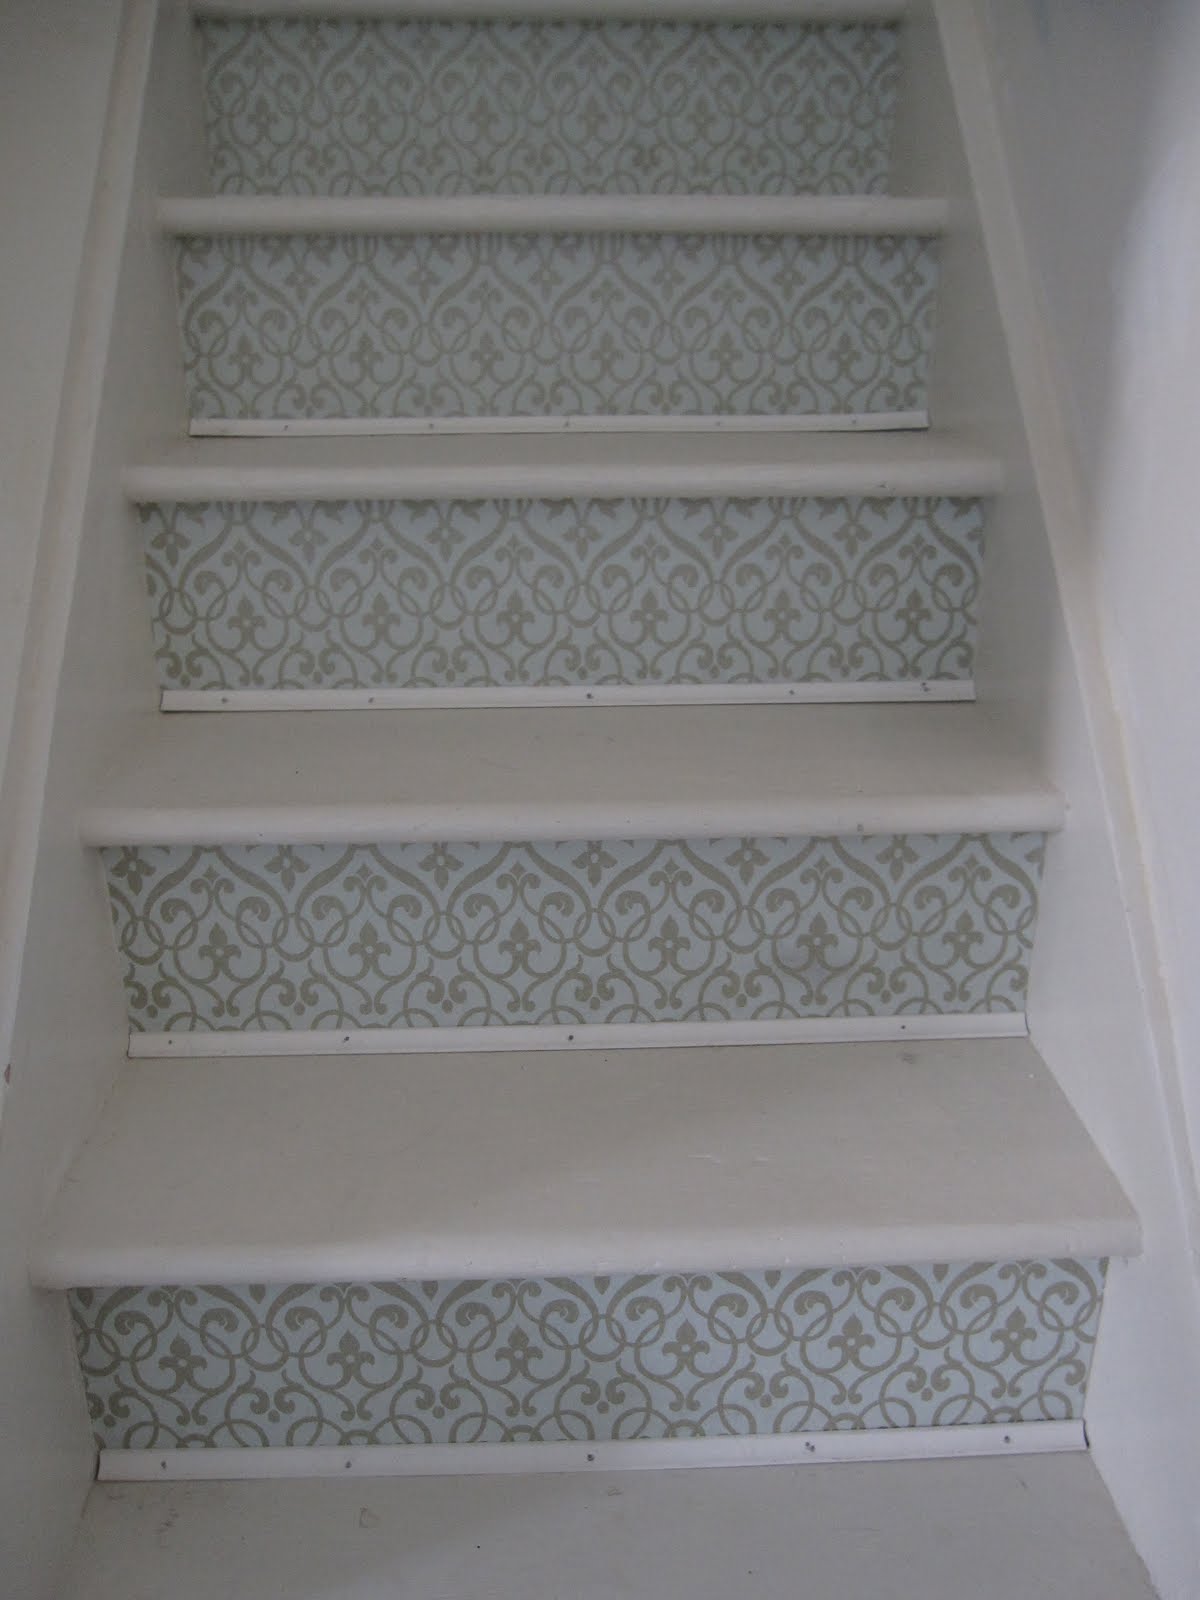 Here is a close up of the stair risers. Pretty! Pretty! Pretty!